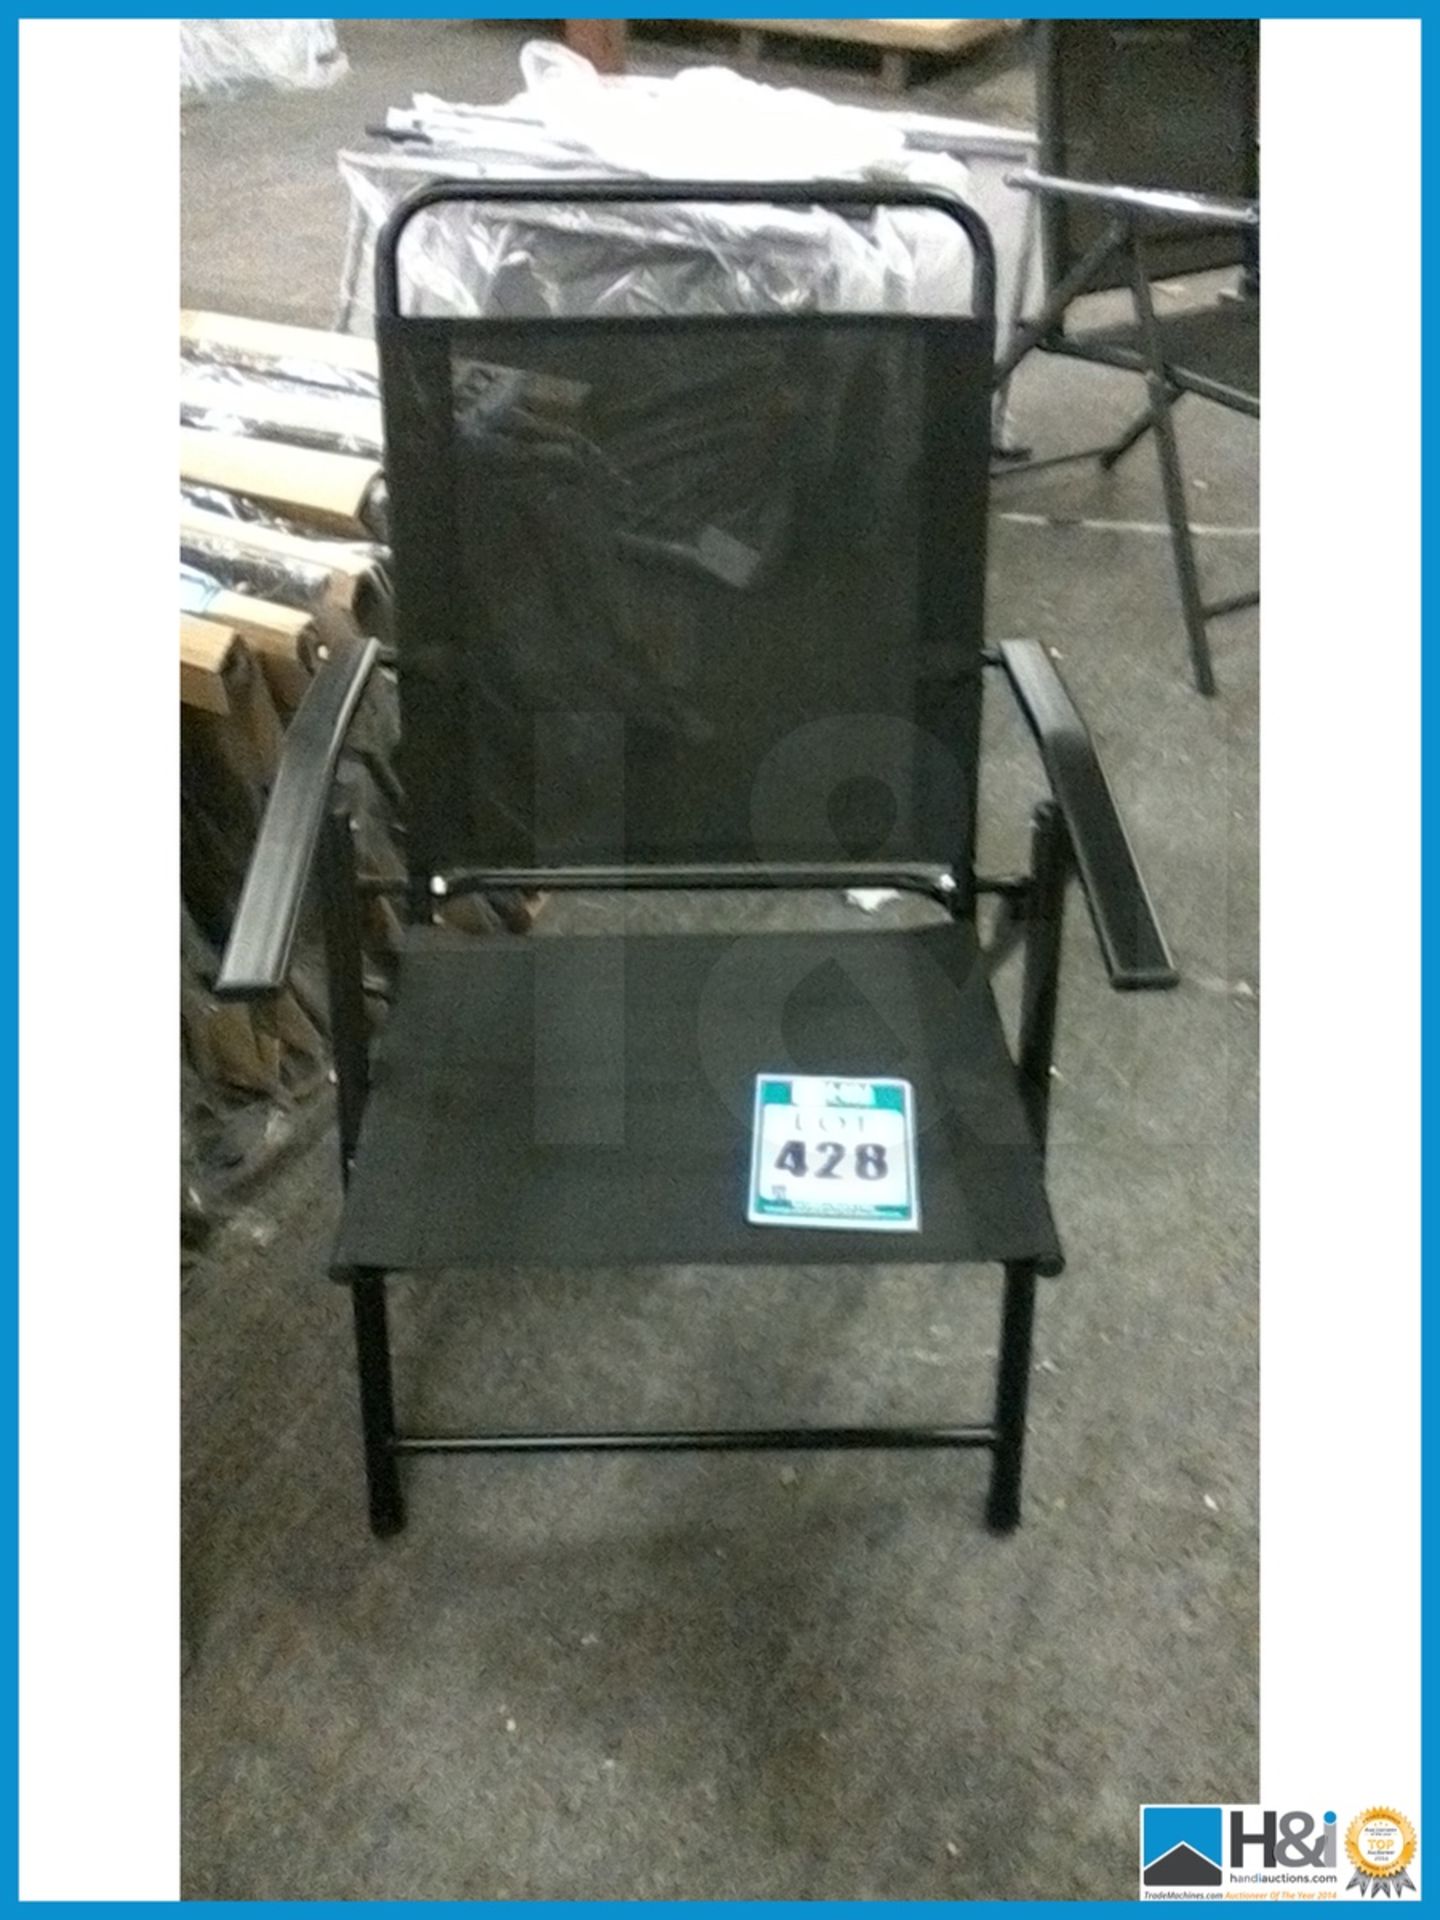 NEW IN BOX NEW IN BOX FOLDING GARDEN CHAIRS PAIR [BLACK] Appraisal: Viewing Essential Serial No: